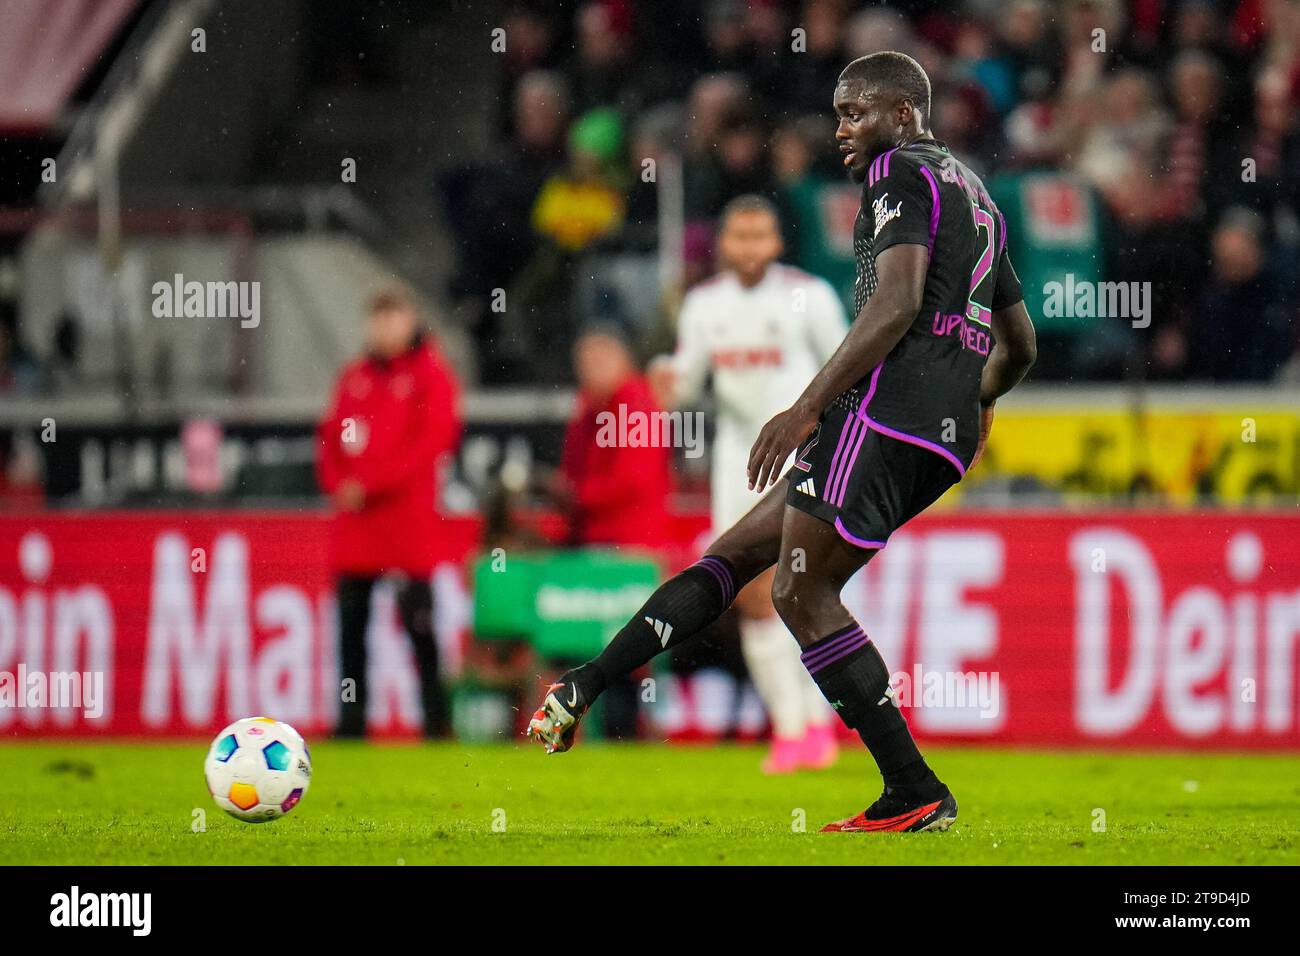 Cologne, Germany. 24th Nov, 2023. COLOGNE, GERMANY - NOVEMBER 24: Dayot Upamecano of FC Bayern Munchen passes the ball during the Bundesliga match between 1. FC Koln and FC Bayern Munchen at the RheinEnergieStadion on November 24, 2023 in Cologne, Germany. (Photo by Rene Nijhuis/BSR Agency) Credit: BSR Agency/Alamy Live News Stock Photo